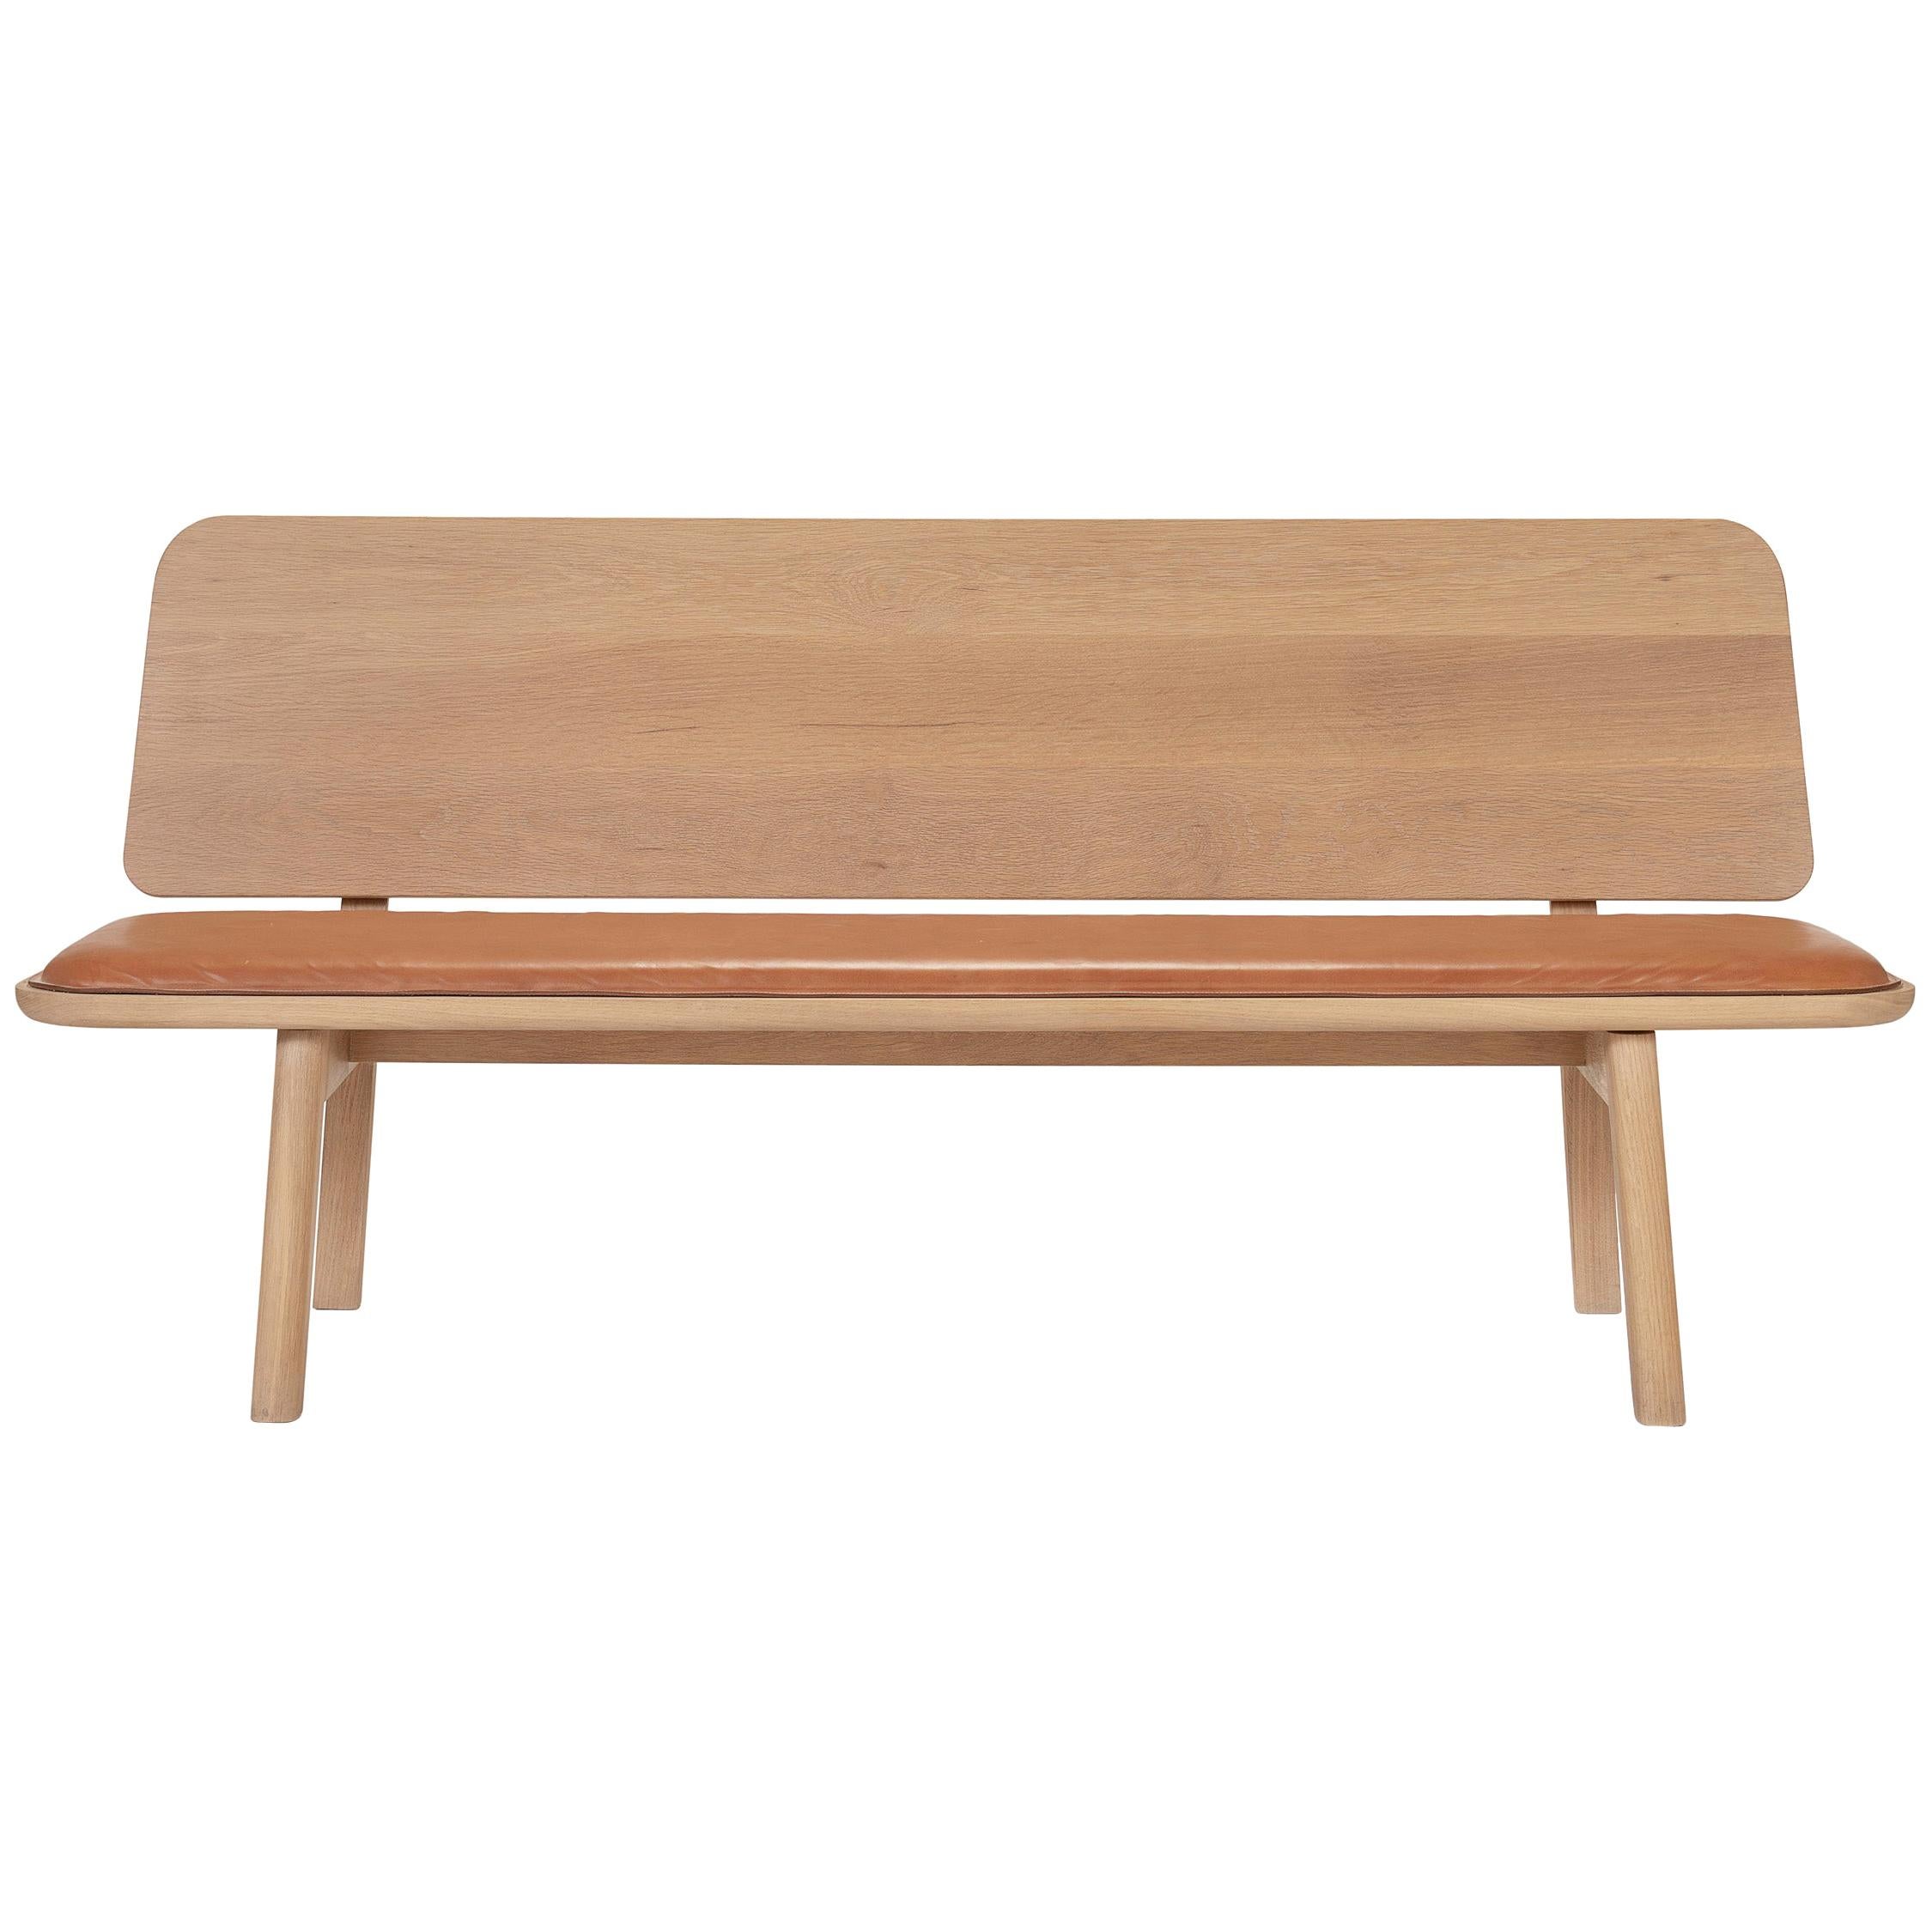 Olo Bench, Solid White Oak, Hand-Stitched Vegetable Tanned Leather Upholstery